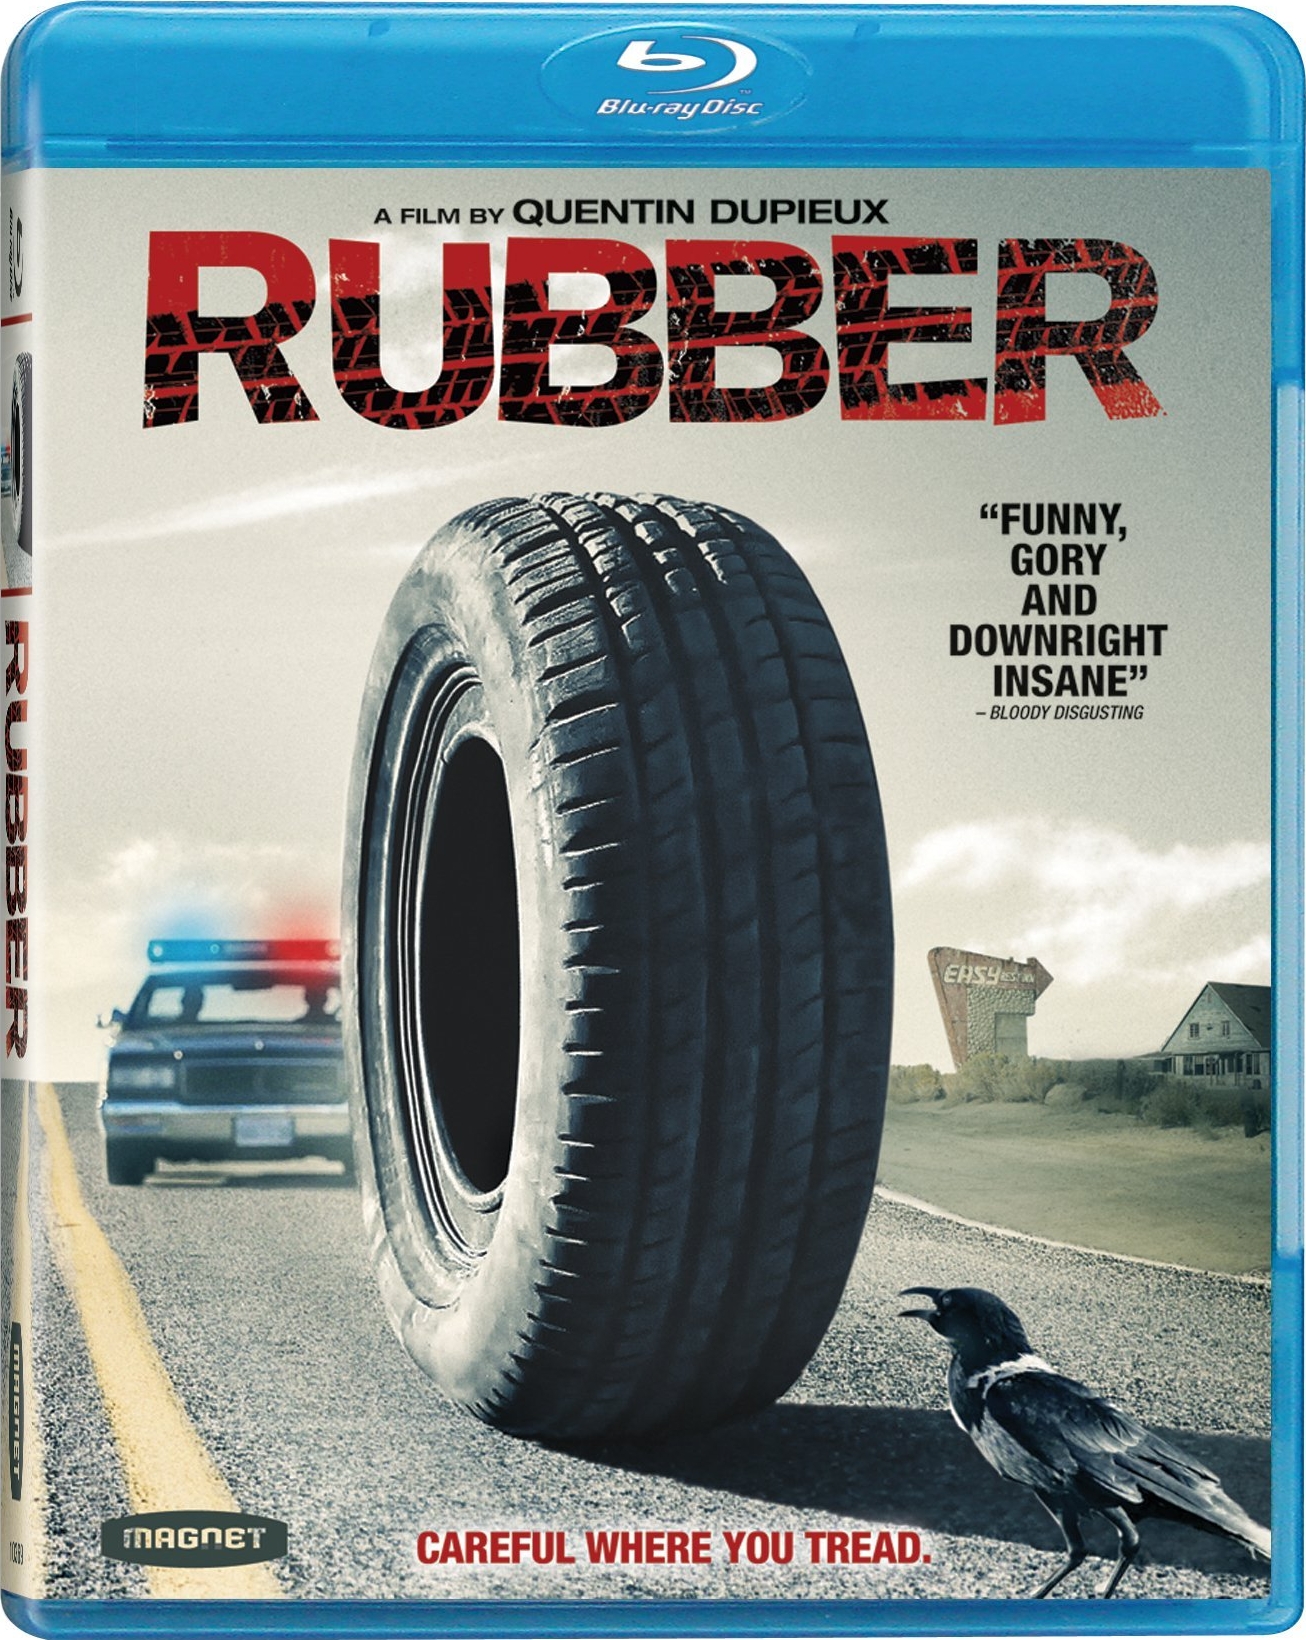 Rubber (Blu-ray), Quentin Dupieux